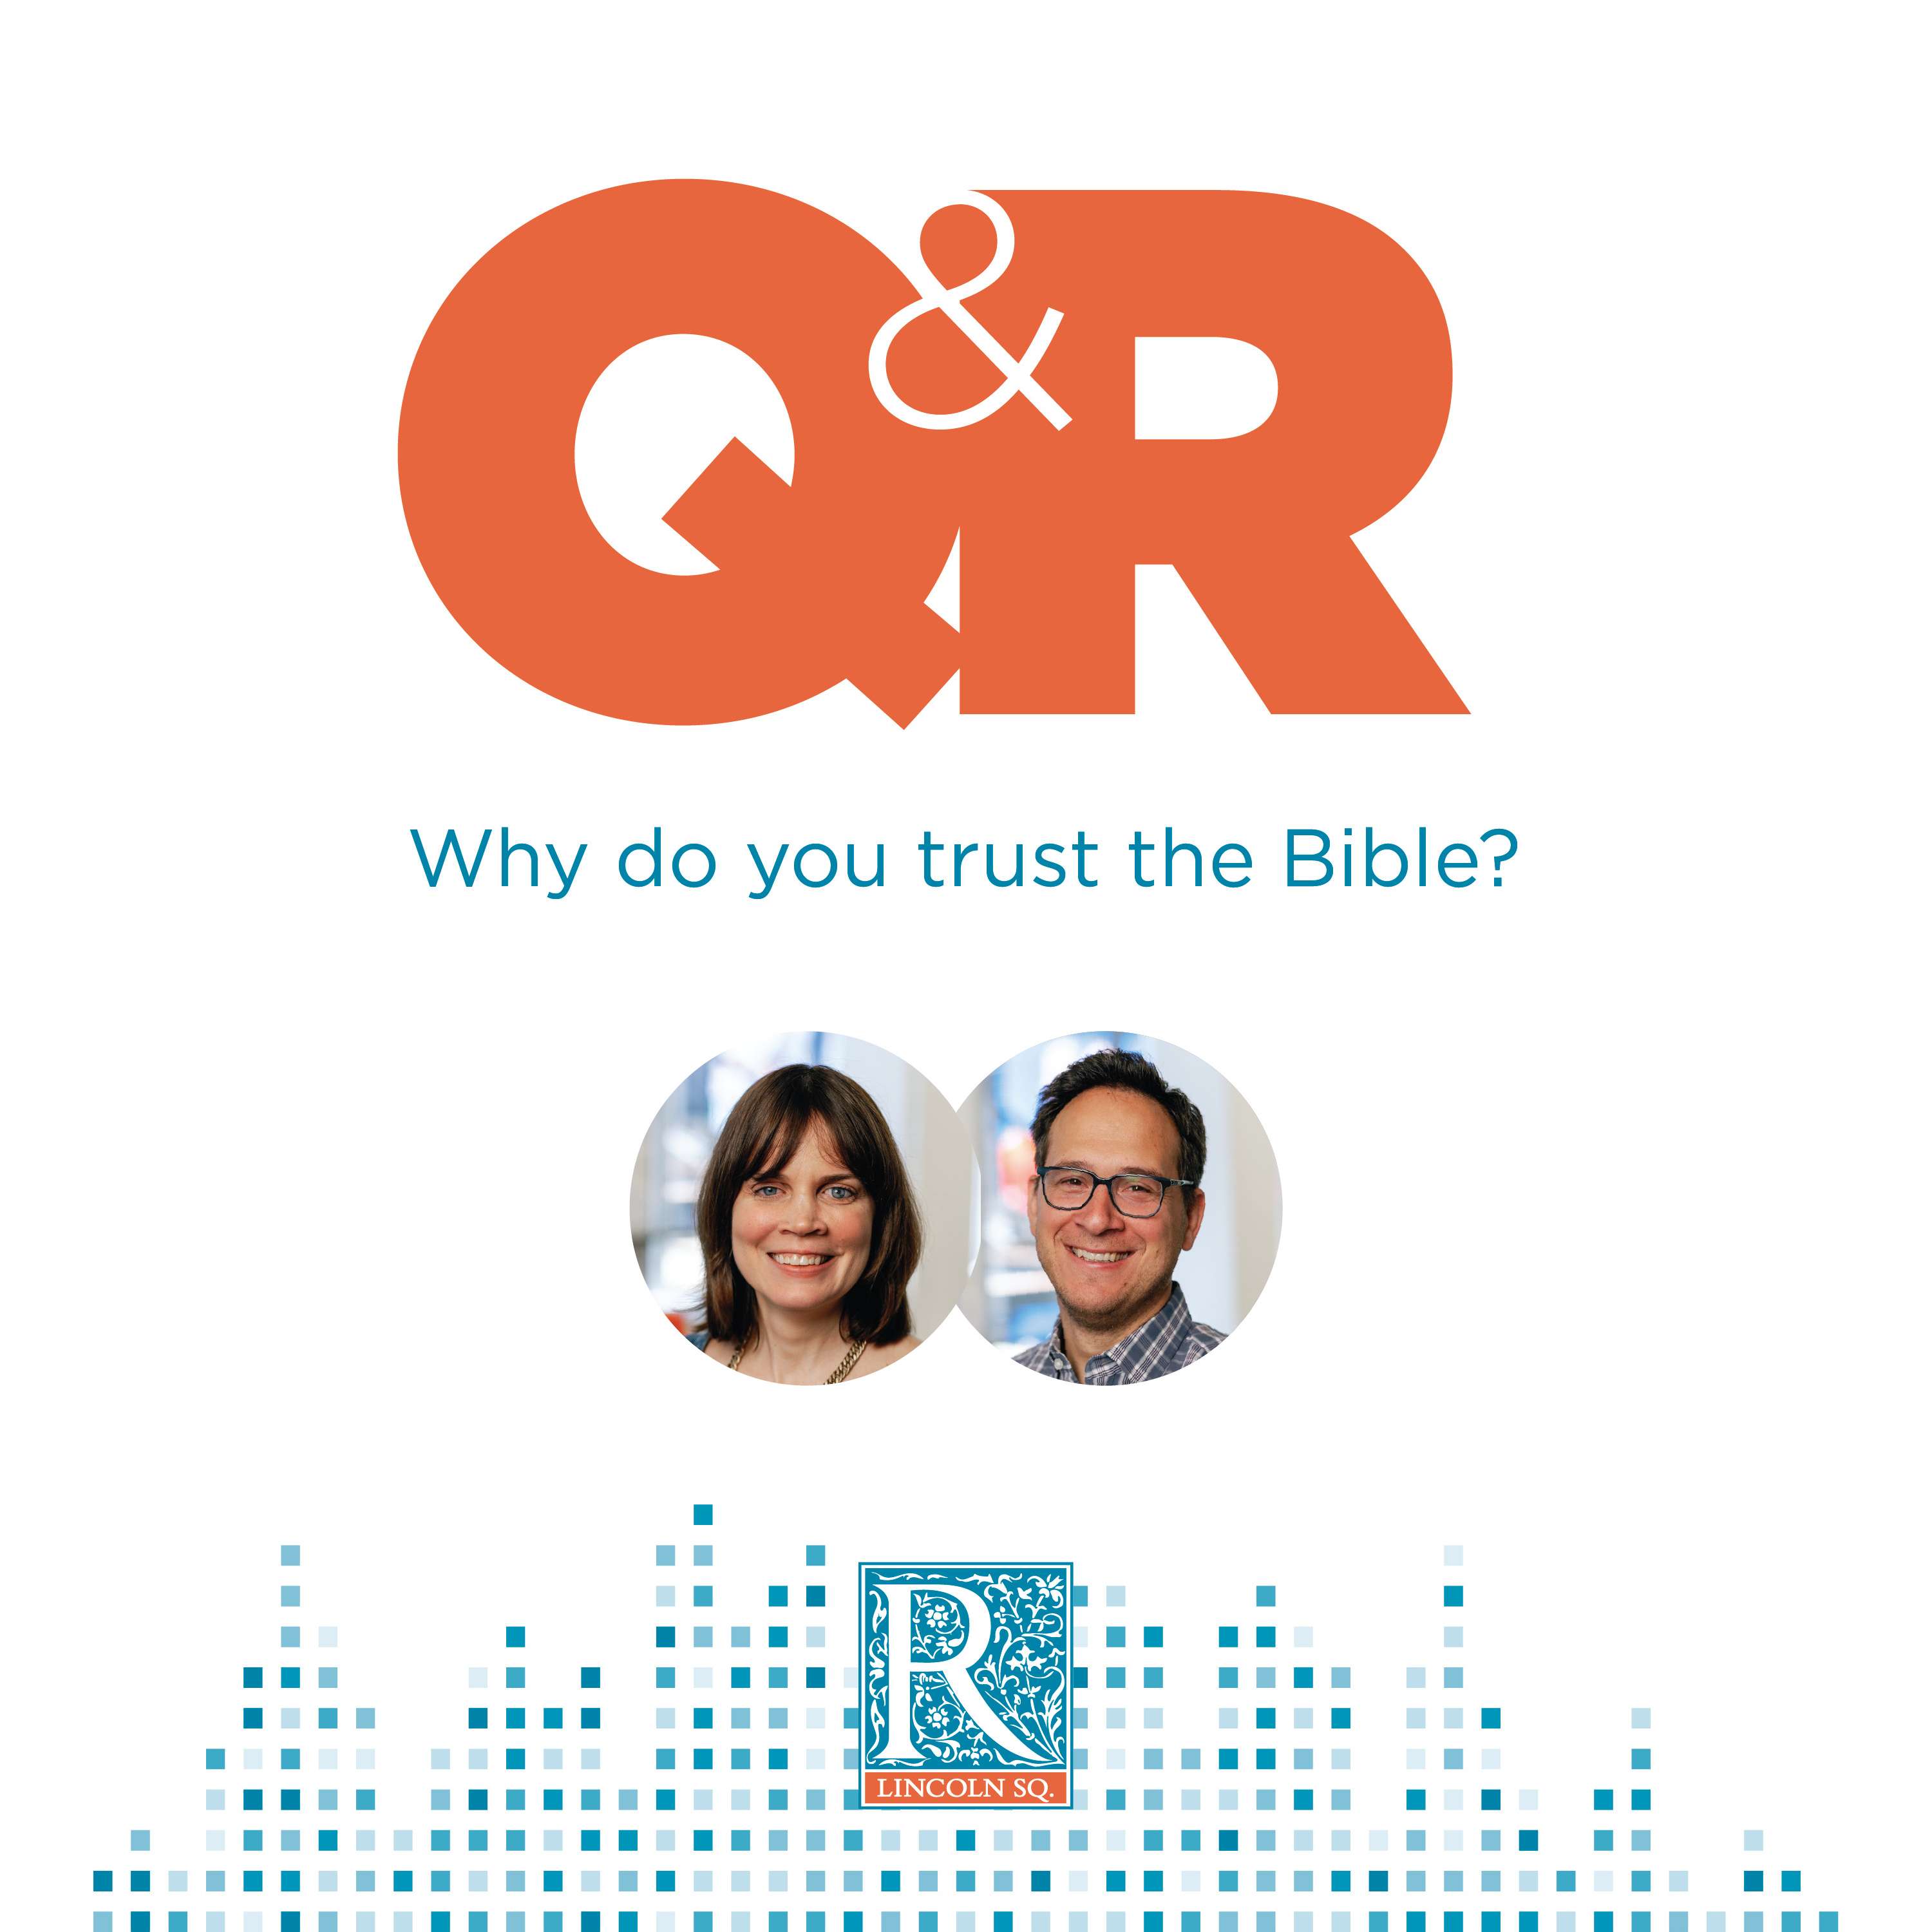 Why do you trust the Bible?